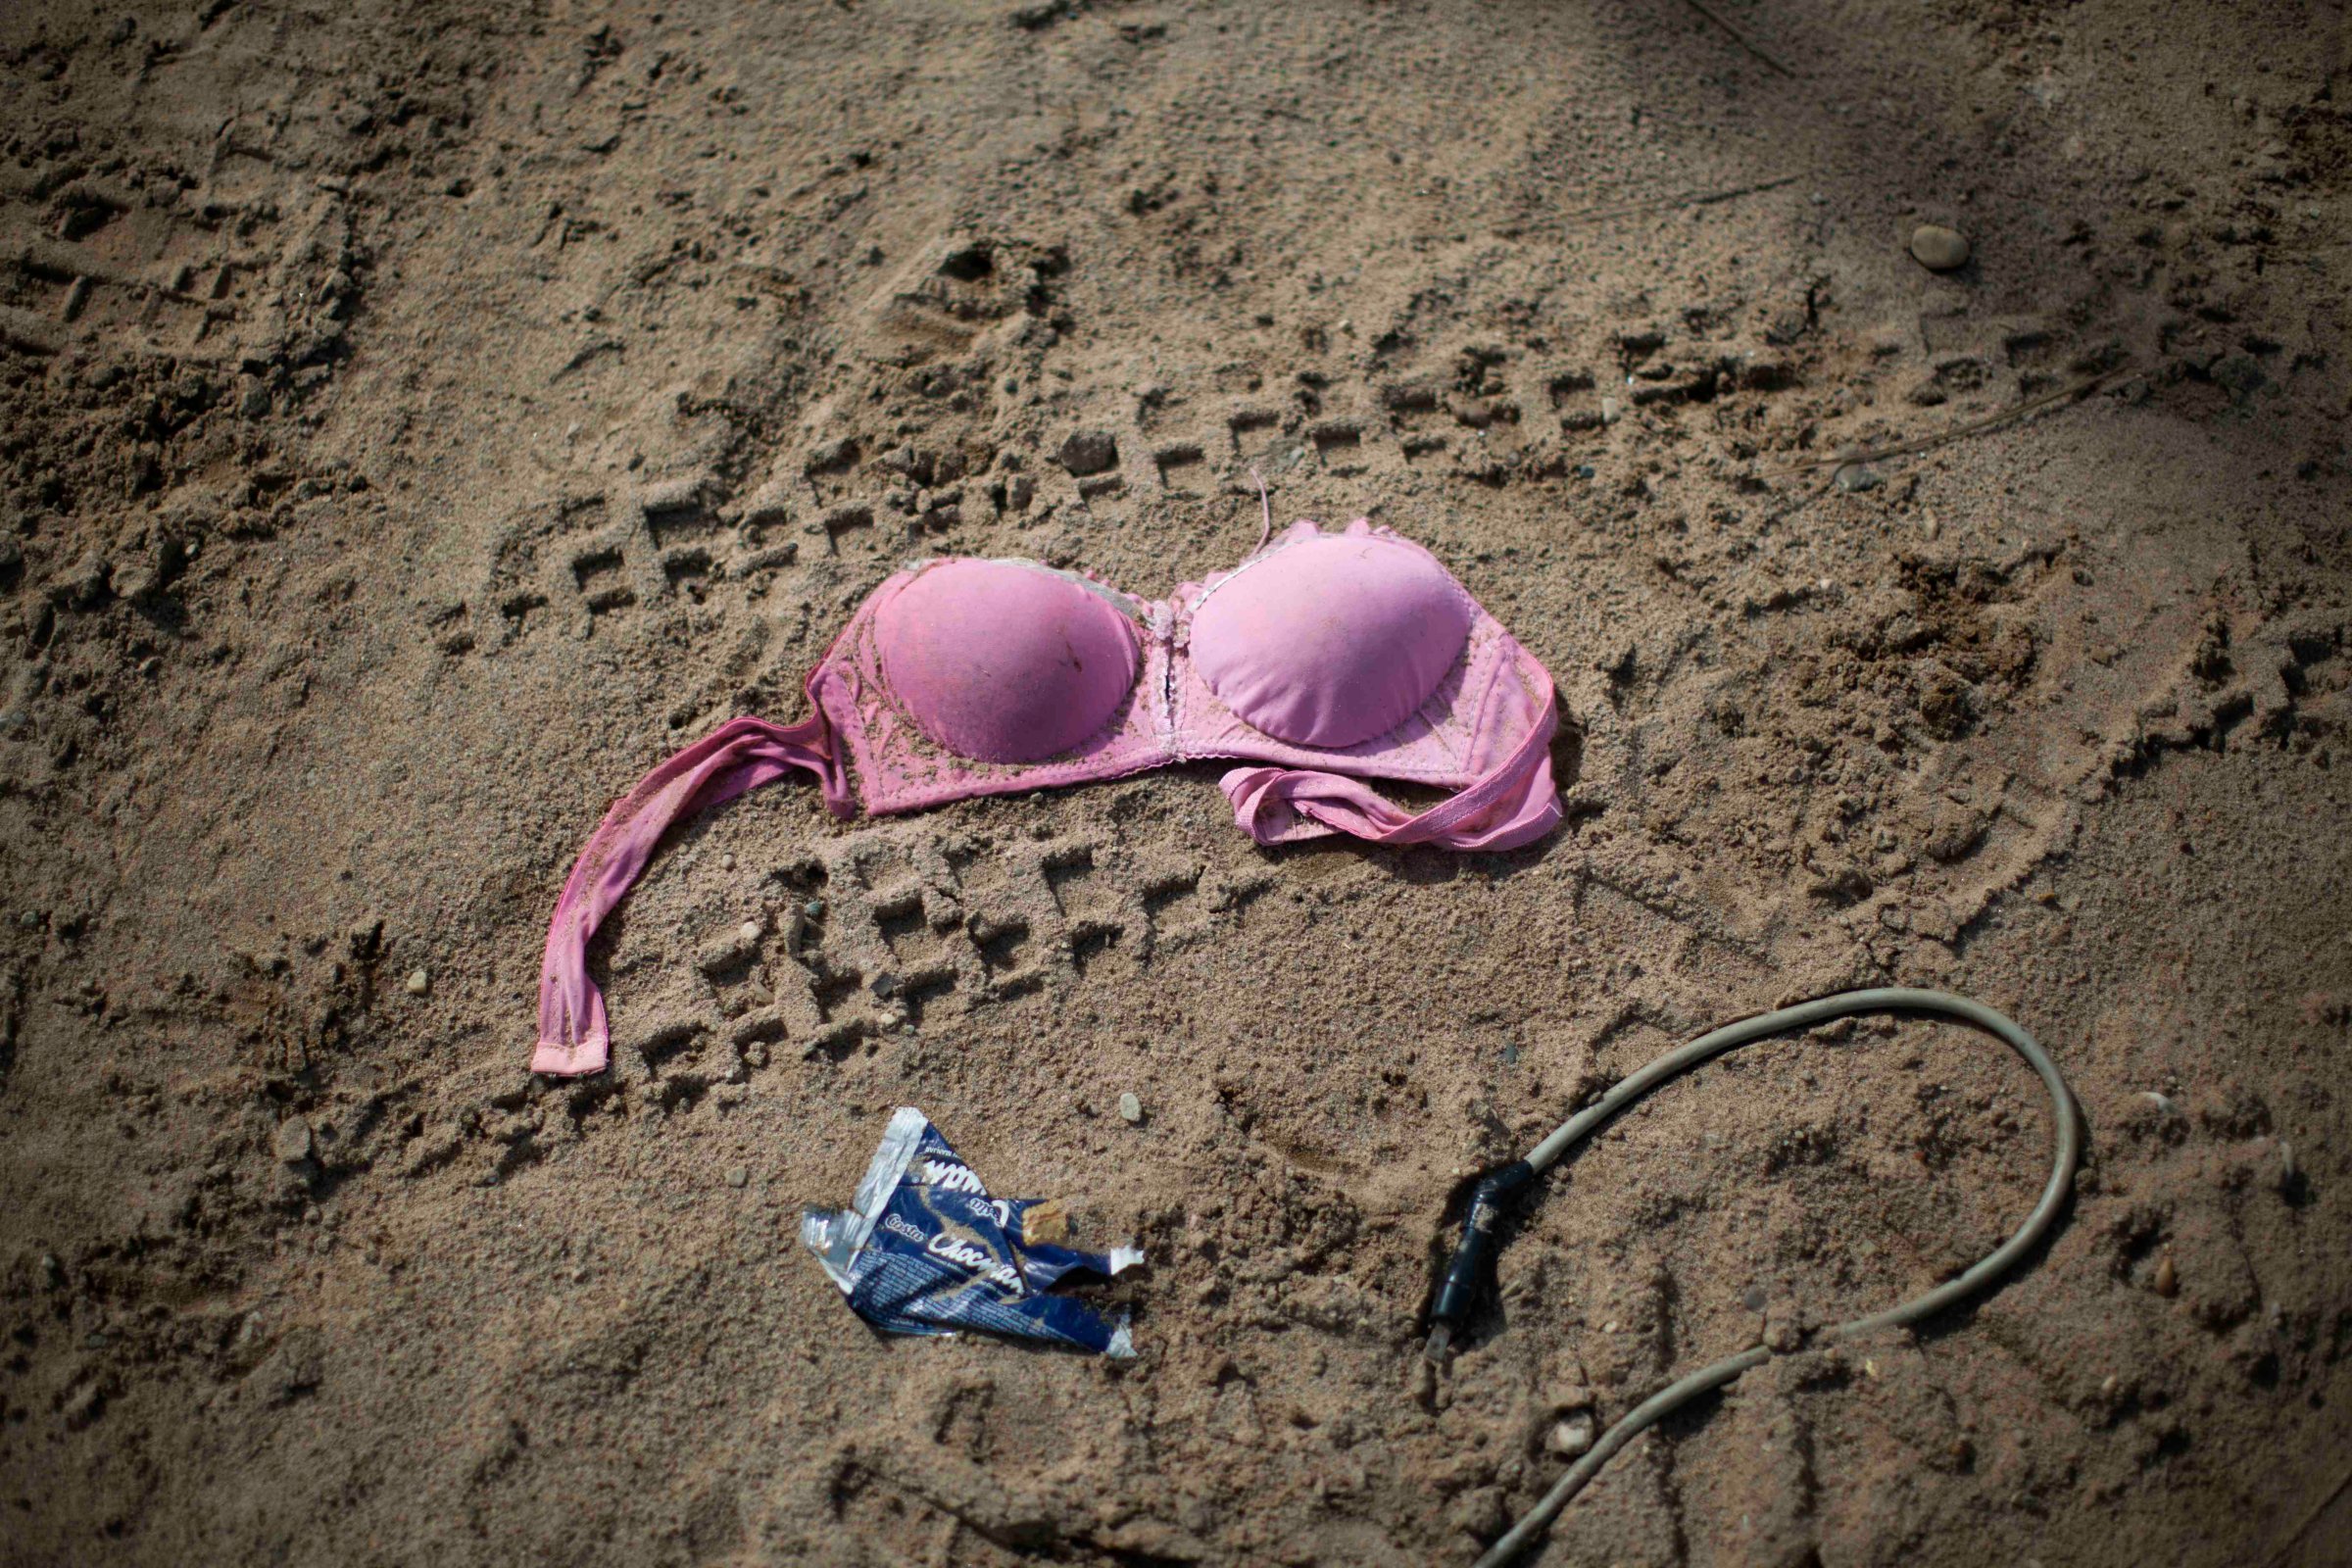 FILE - In this Friday, May 16, 2014 file photo, a discarded bra lies on the ground outside an informal bar that allegedly employed sex workers after a government raid on the illegal mining camp in La Pampa in the Madre de Dios region of Peru. Amnesty International approved a controversial policy Tuesday, Aug. 11, 2015 to endorse the de-criminalization of the sex trade, rejecting complaints by womens rights groups who say it is tantamount to advocating the legalization of pimping and brothel owning. (AP Photo/Rodrigo Abd, File)